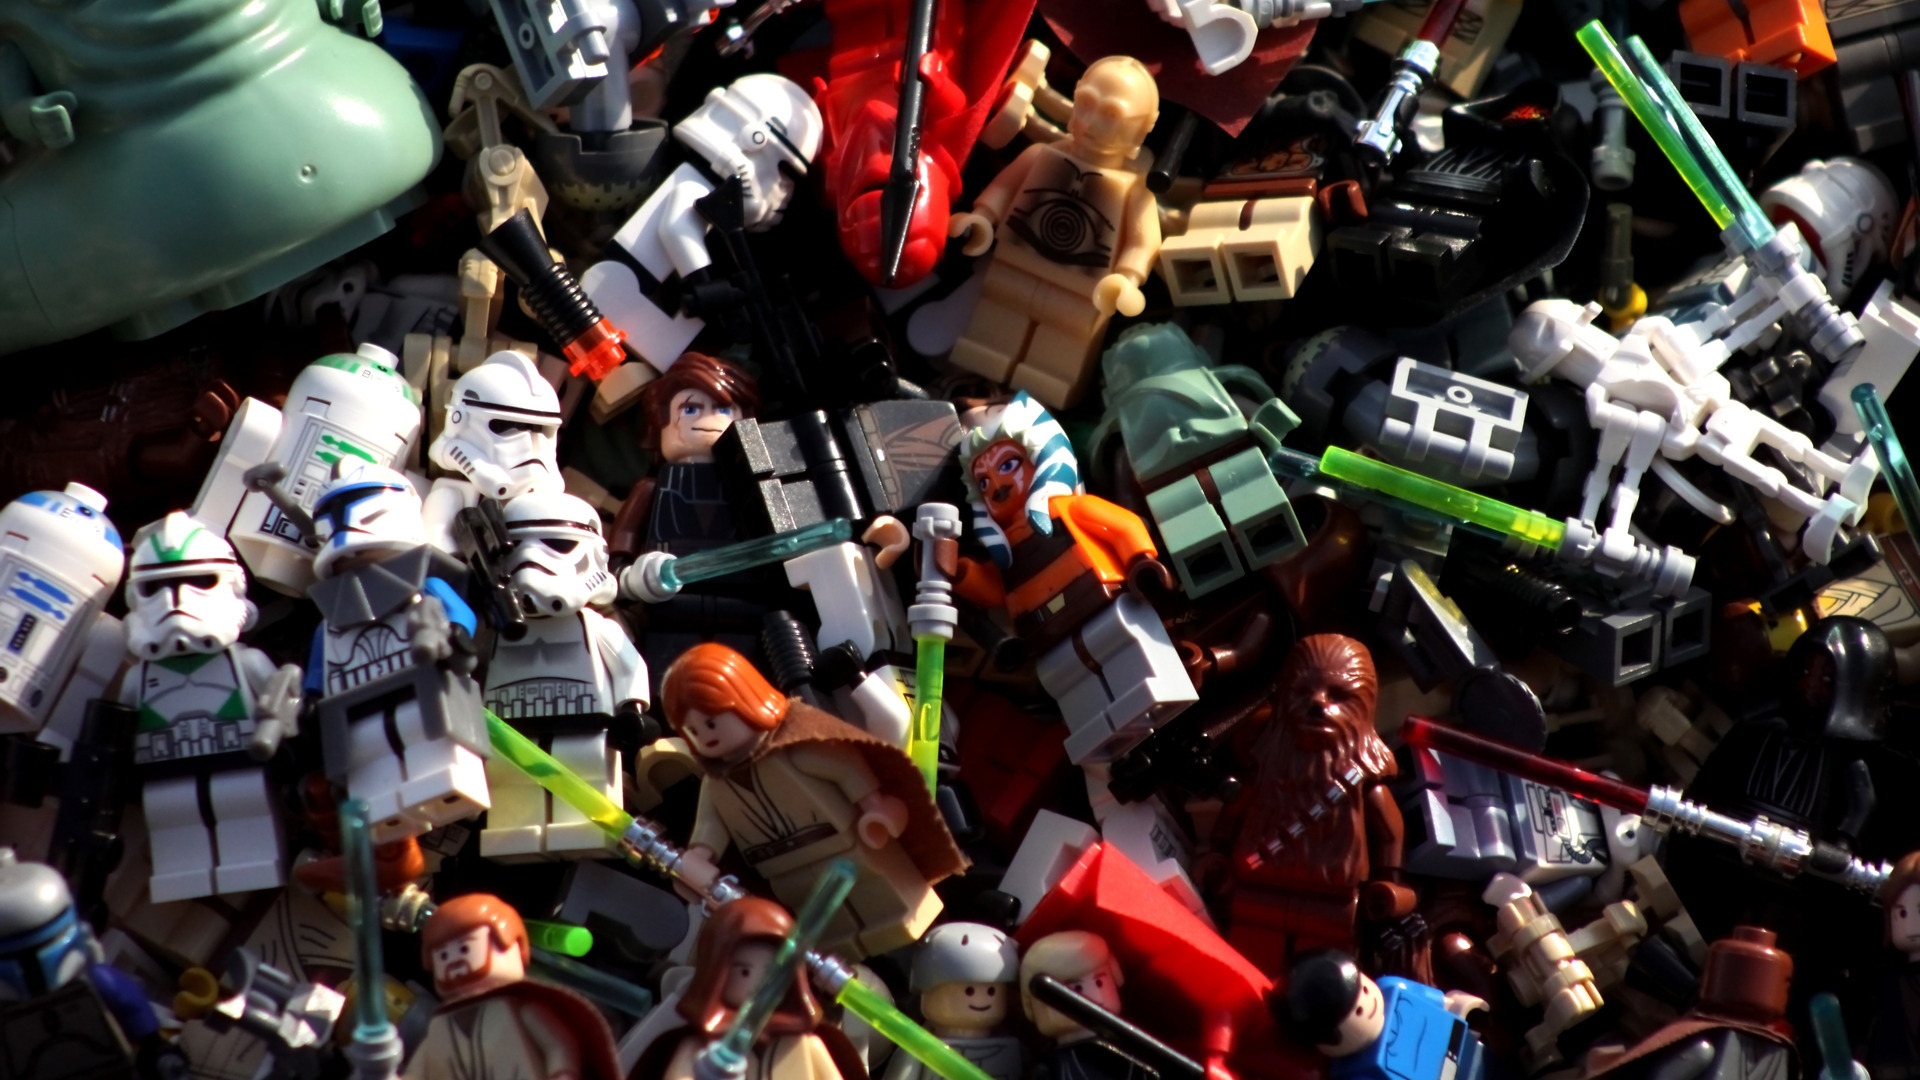 Star Wars Lego Characters for 1920 x 1080 HDTV 1080p resolution